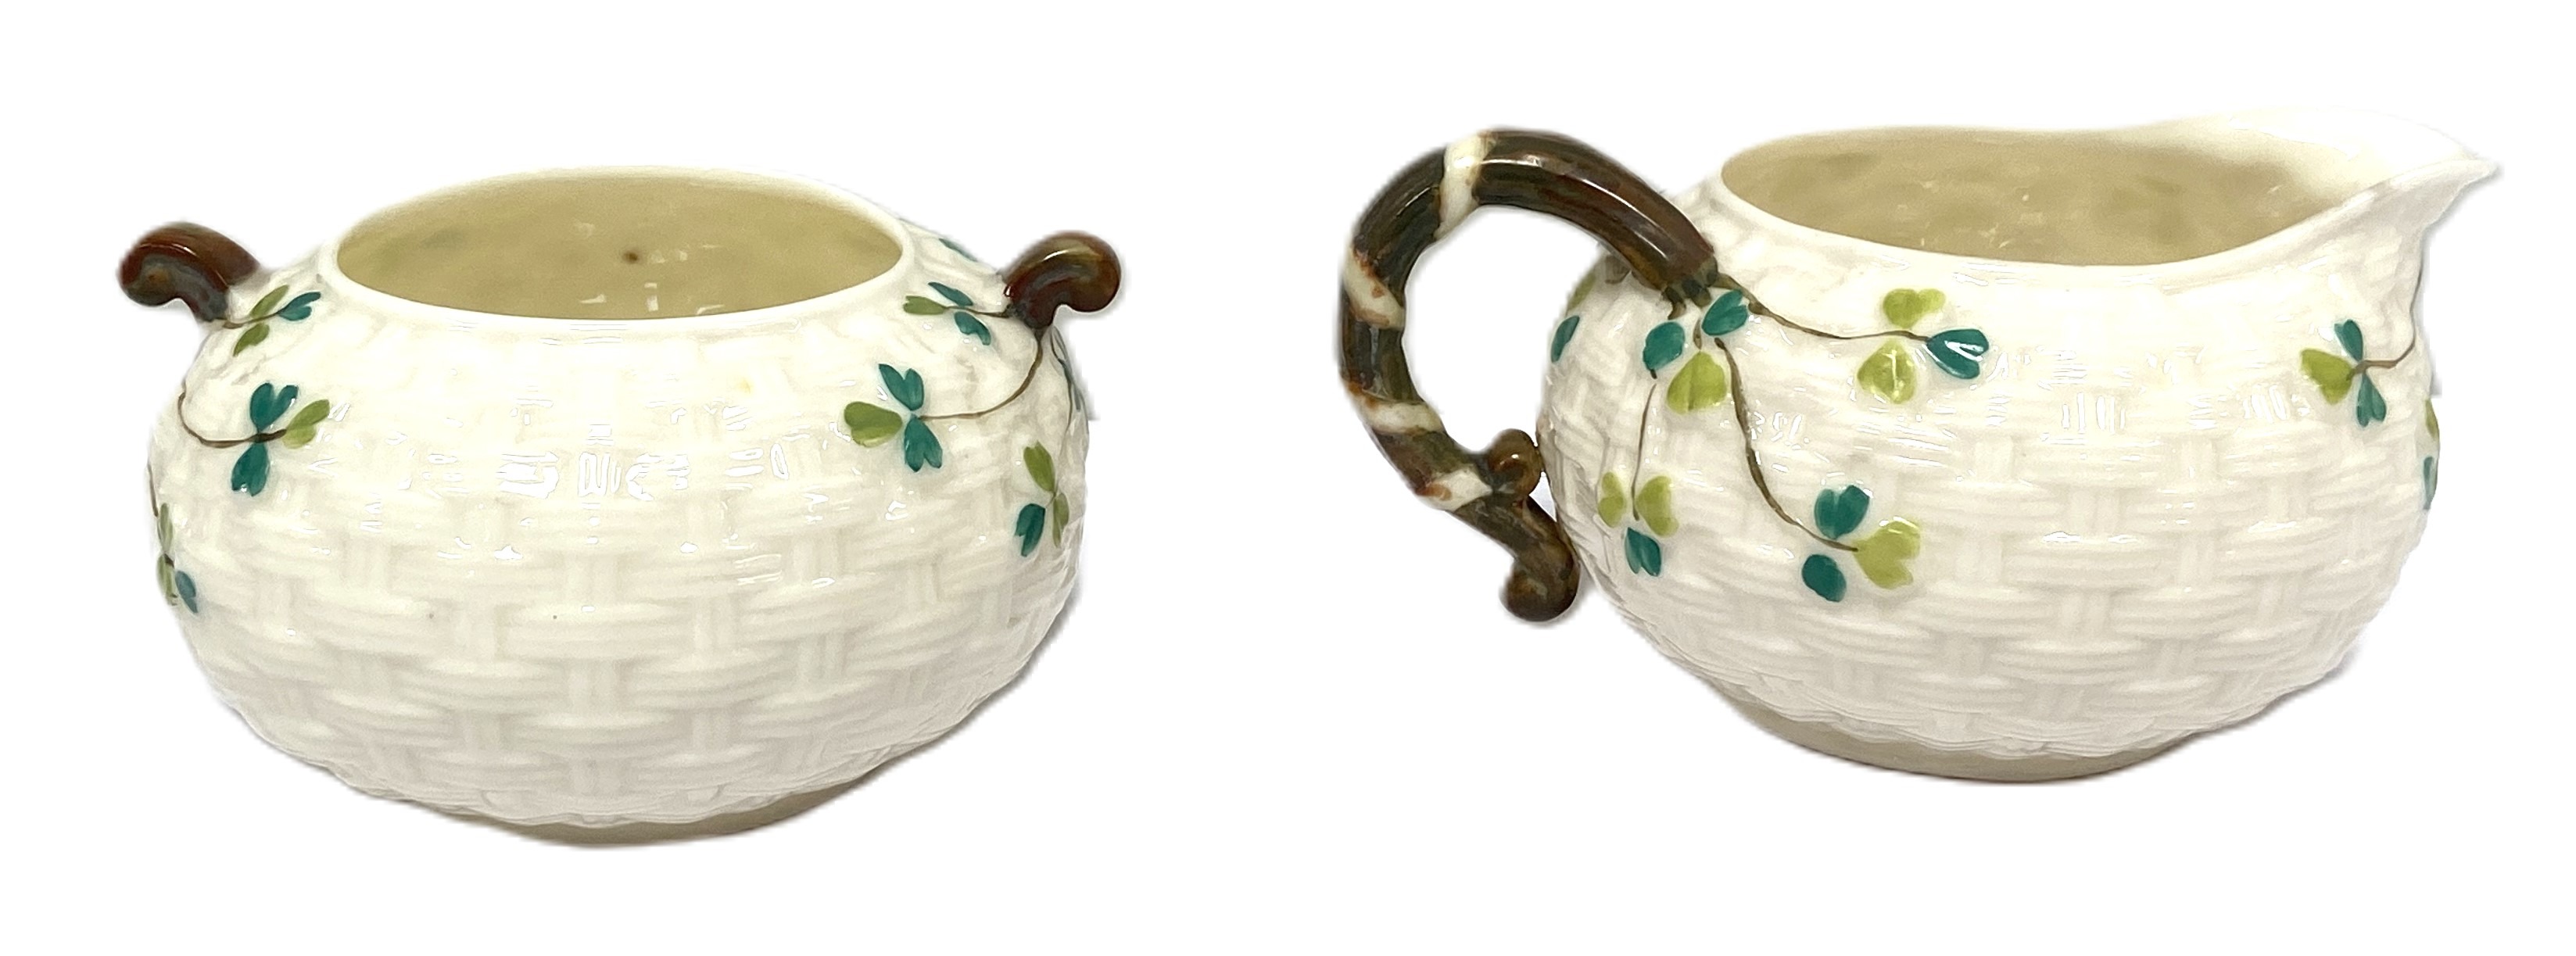 An Irish Belleek part tea service, circa 1900, the teapot with 'basket weave' embossed sides and - Image 5 of 8